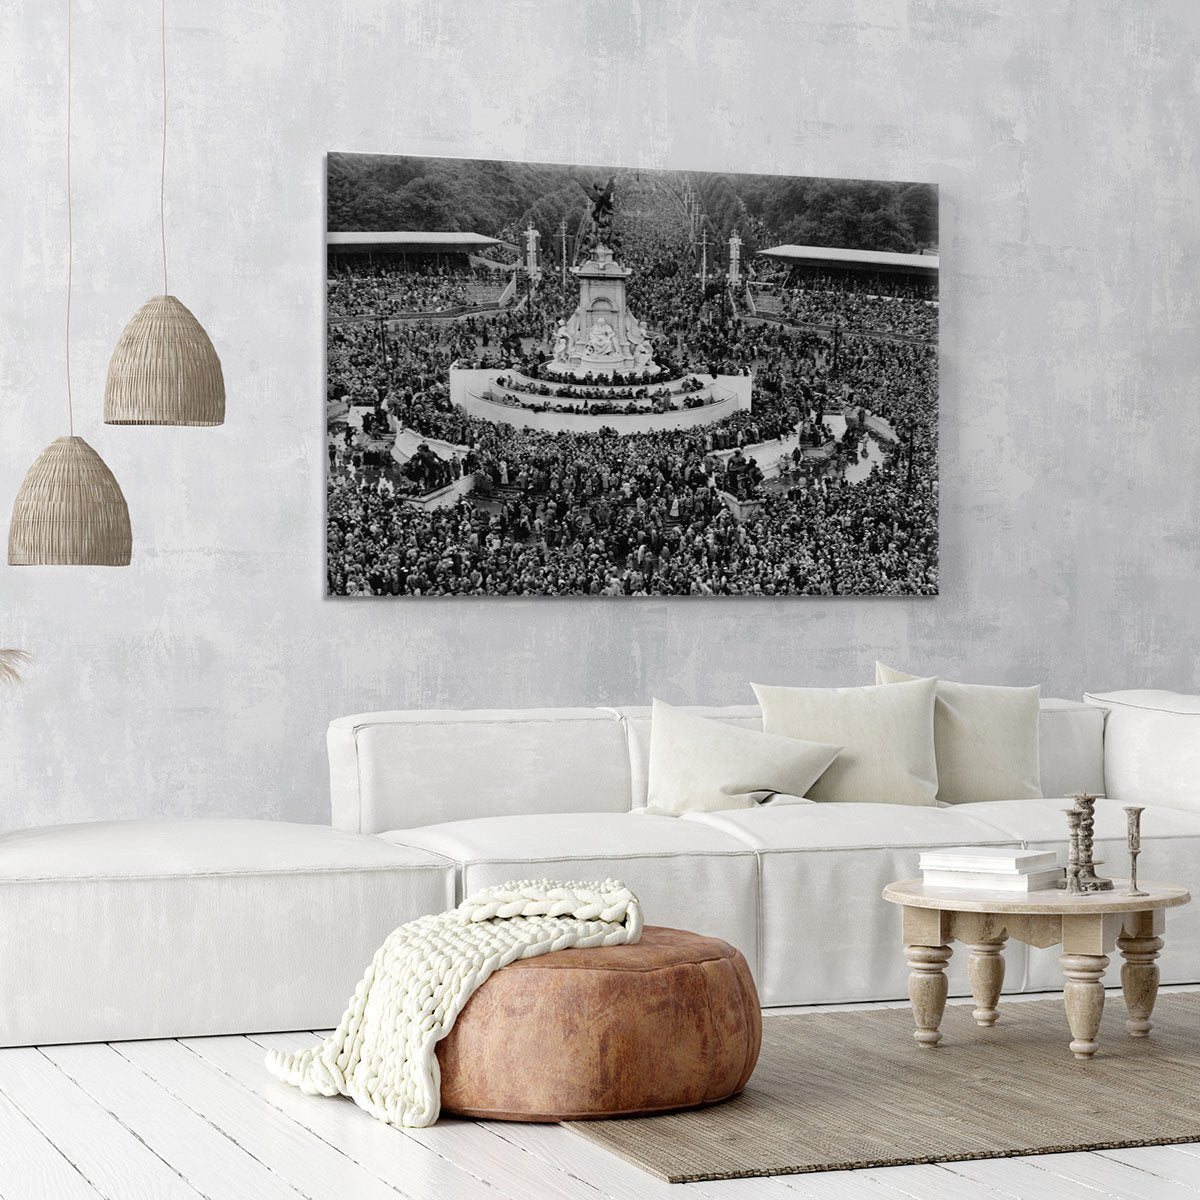 Queen Elizabeth II Coronation crowds at Buckingham Palace Canvas Print or Poster